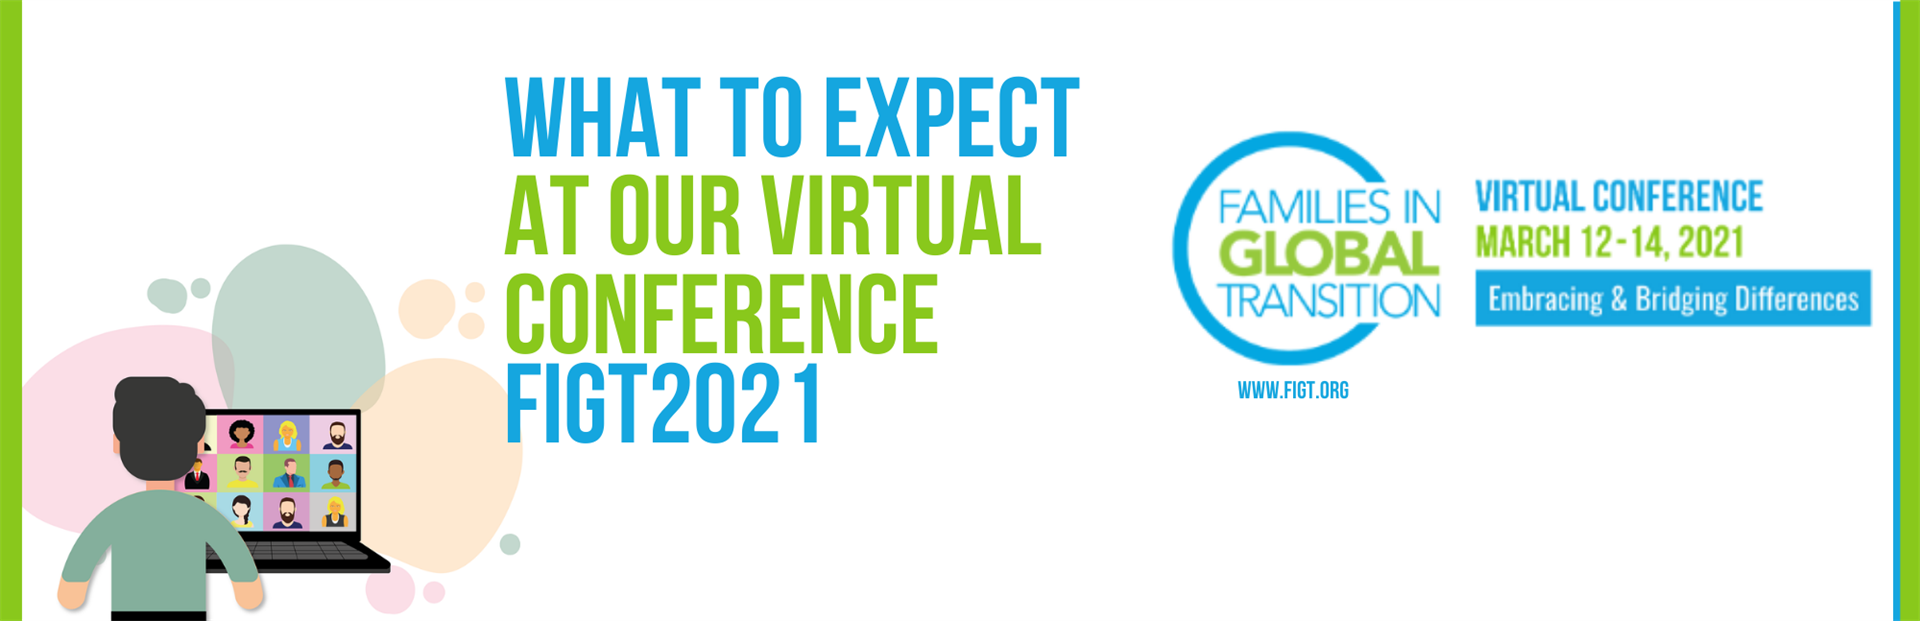 what to expect at figt2021 virtual conference